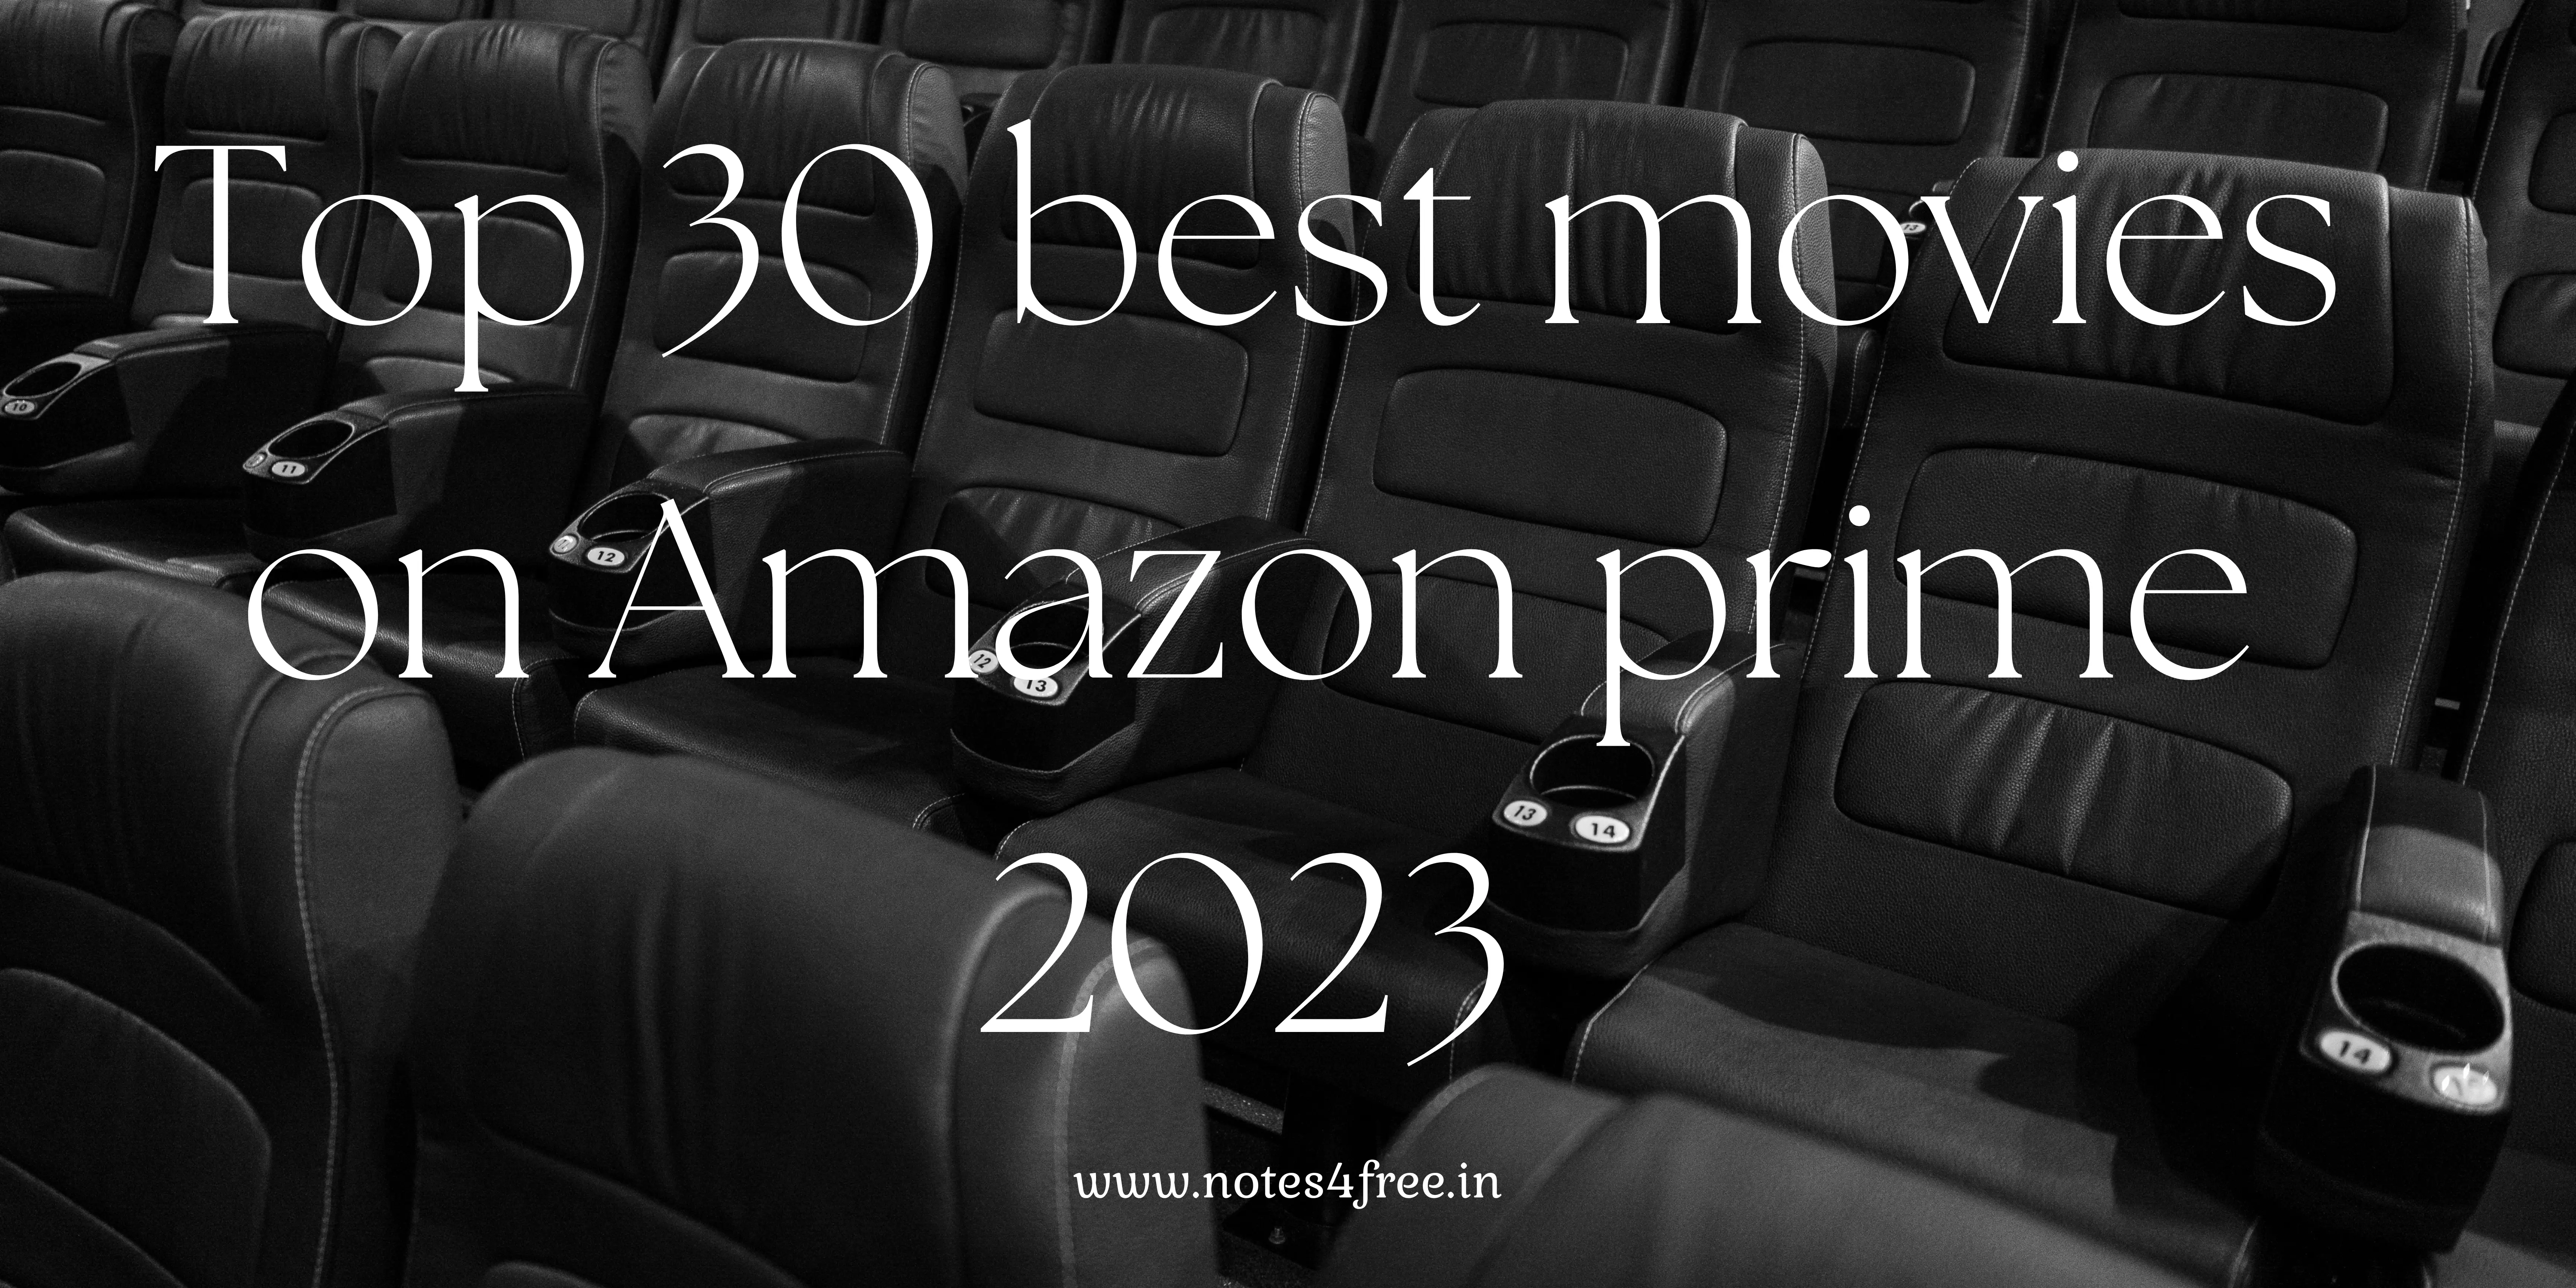 Top 30 best movies-films on Amazon prime 2023